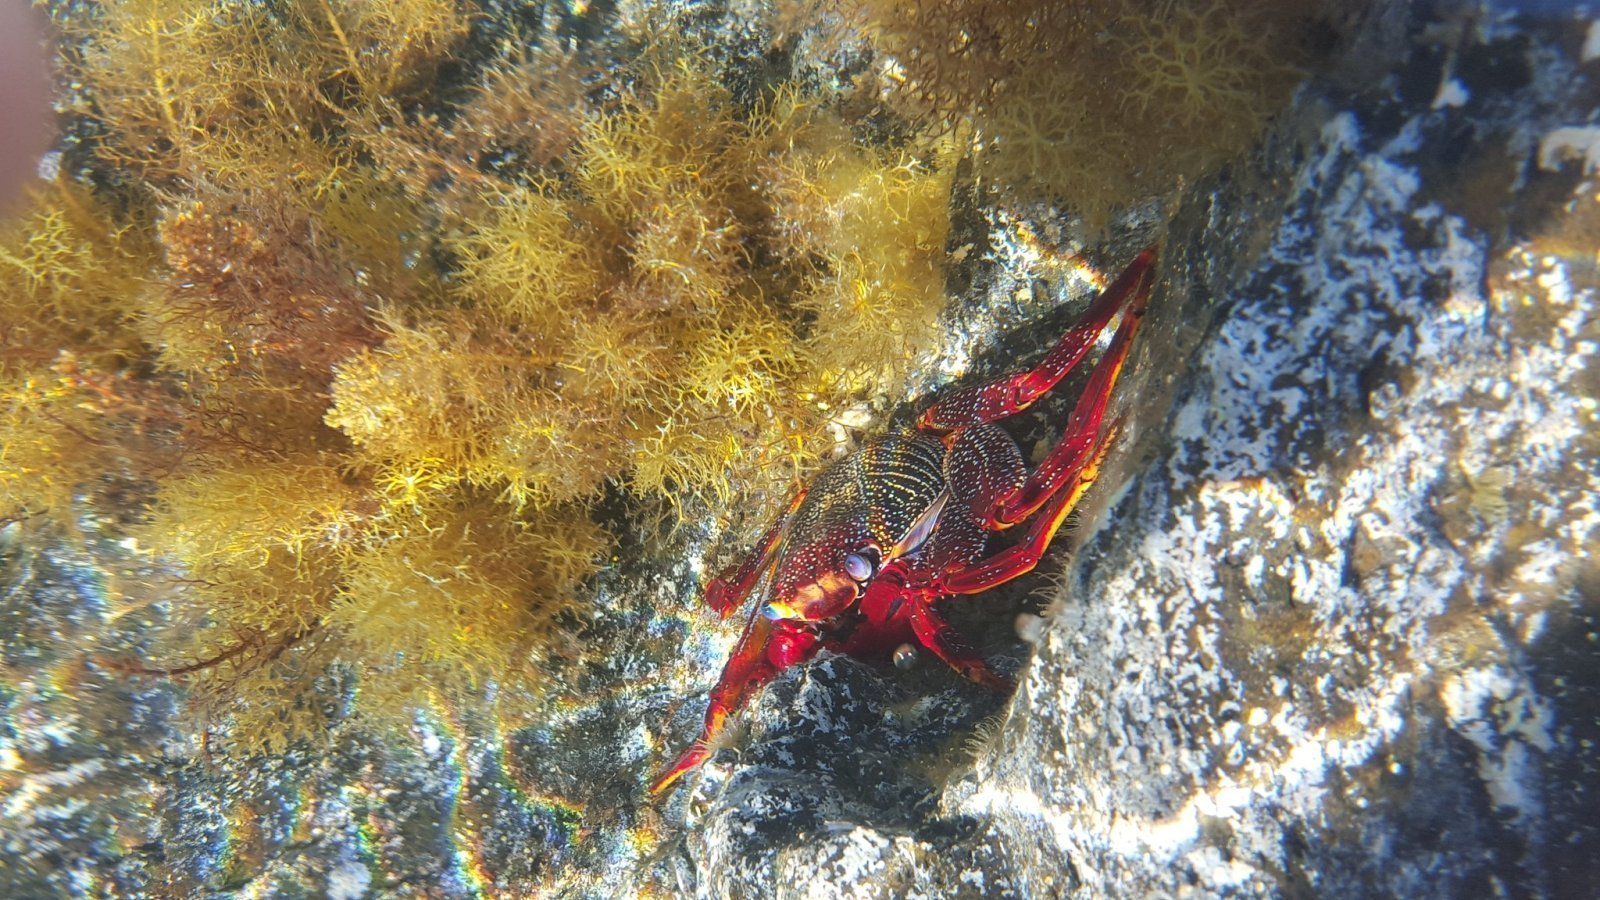 Red crab in the tidal pool nearby Palm Mar